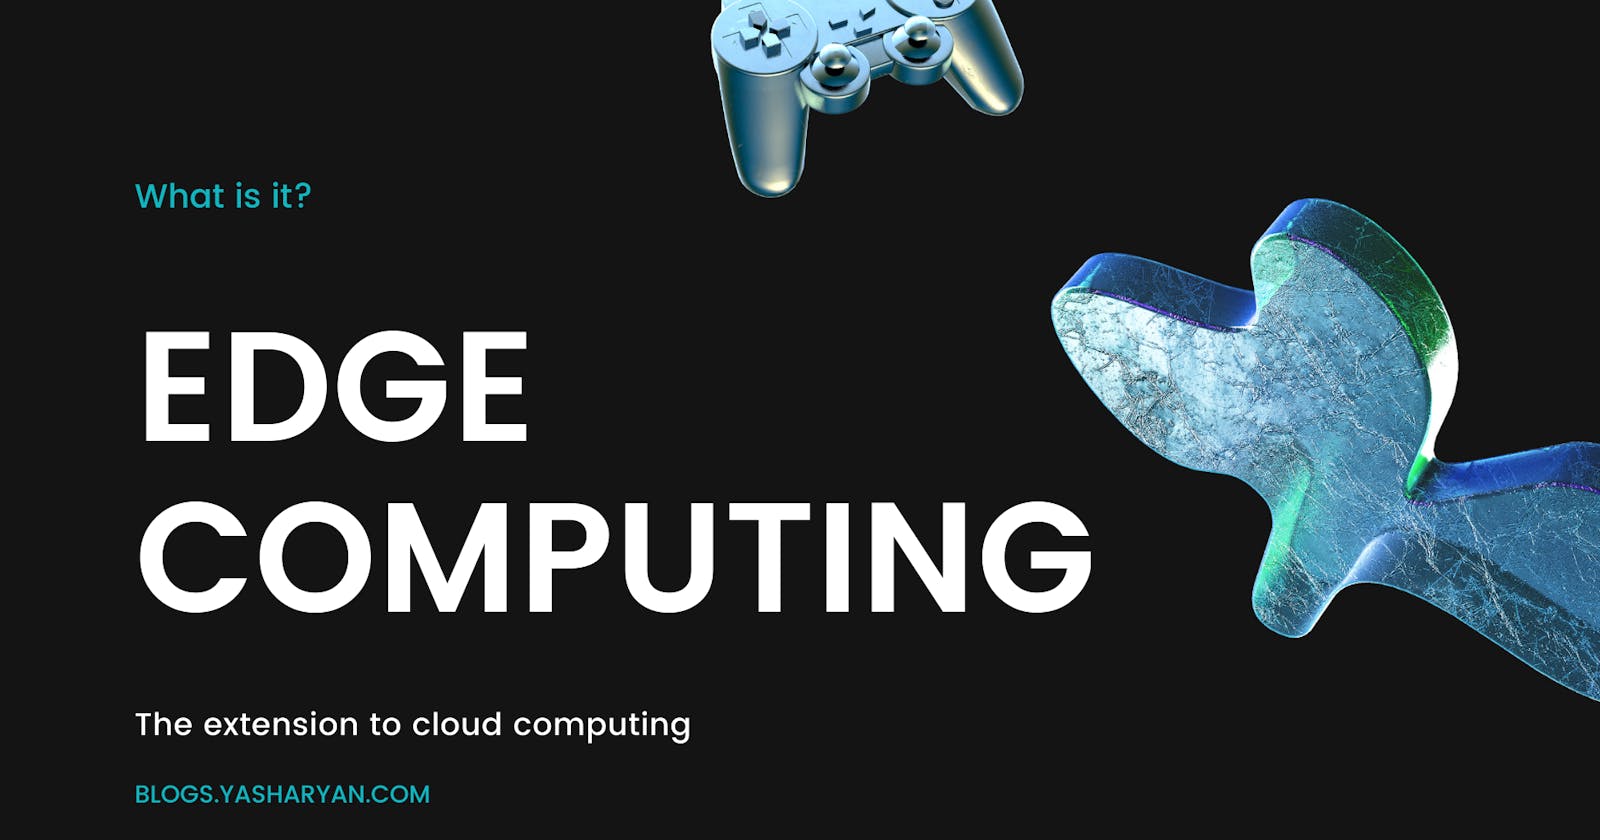 What the fish is Edge Computing?